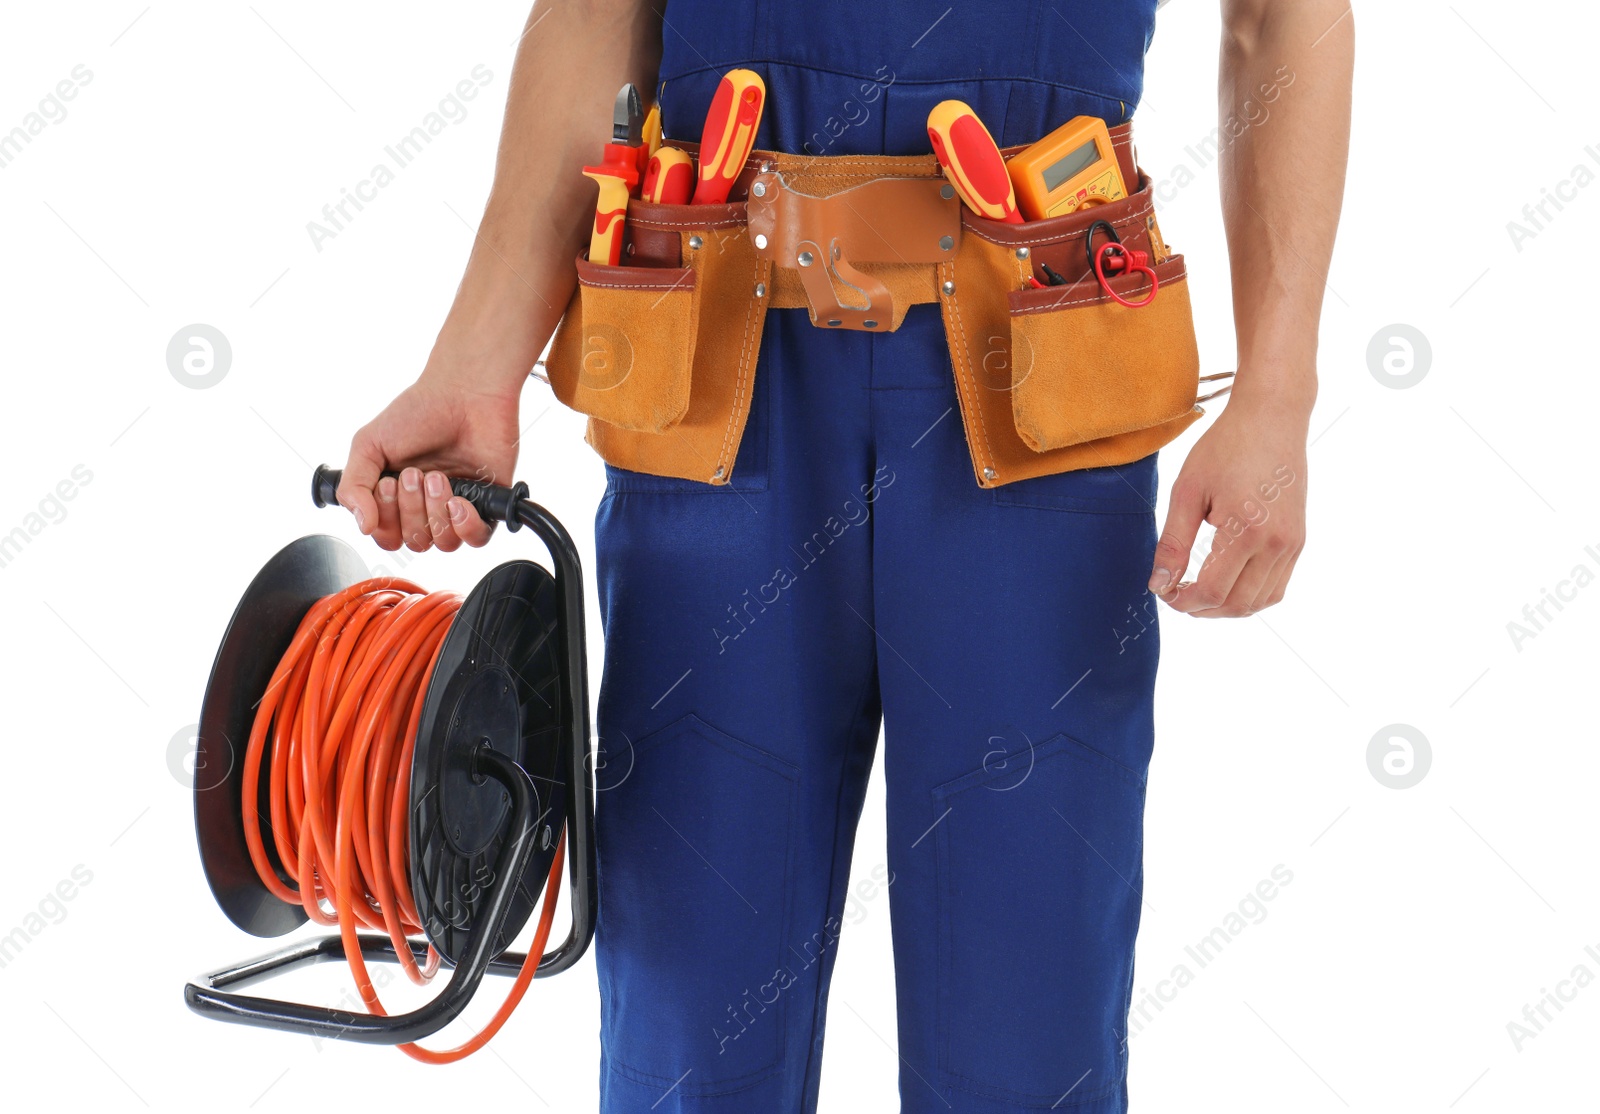 Photo of Electrician with extension cord reel and tools wearing uniform on white background, closeup